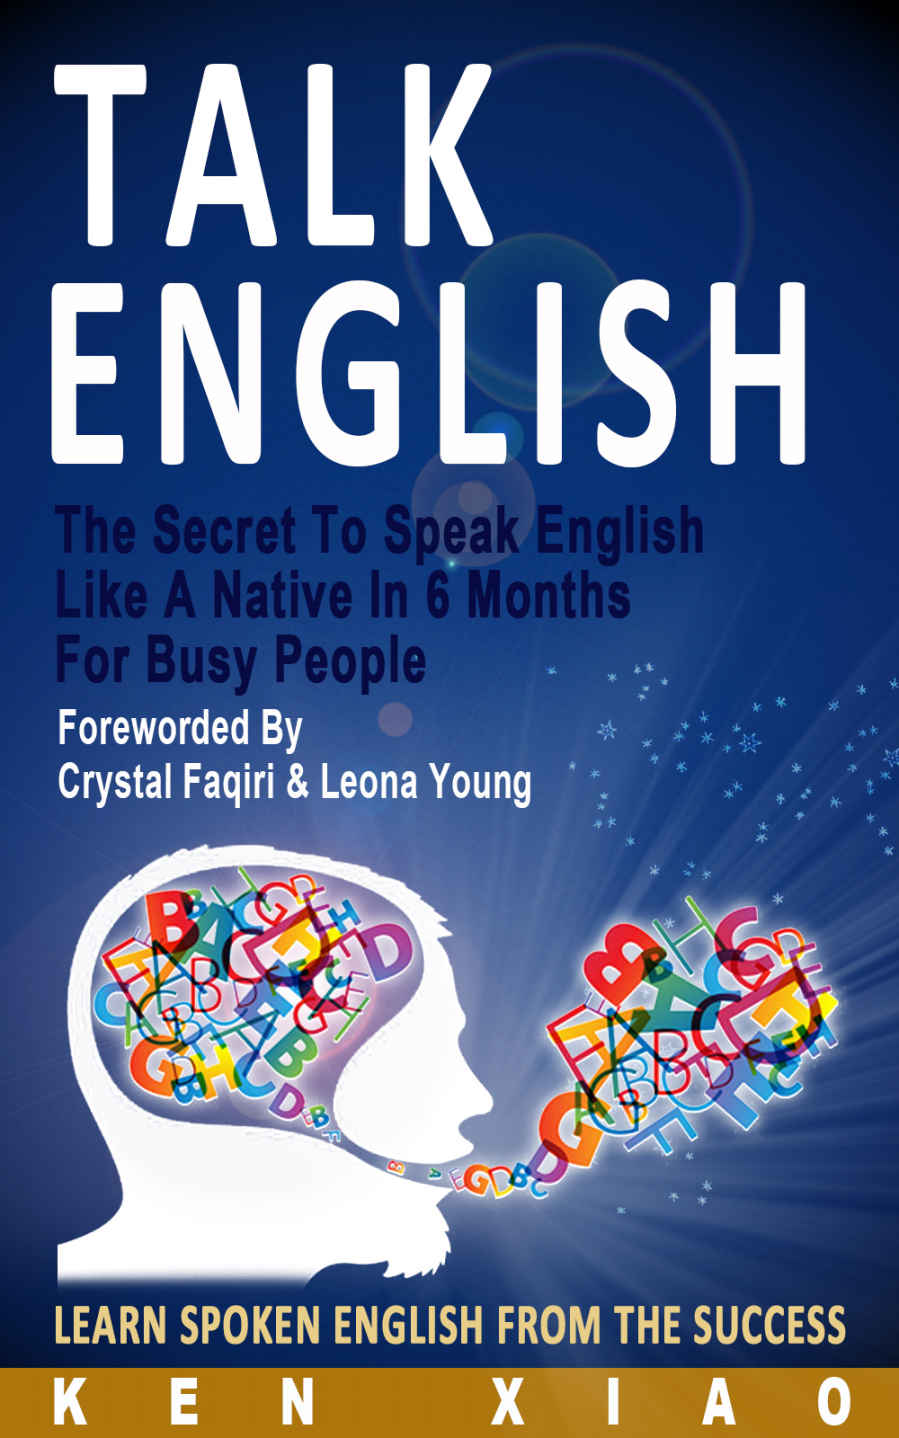 Talk English: The Secret To Speak English Like A Native In 6 Months For Busy People, Learn Spoken English From The Success